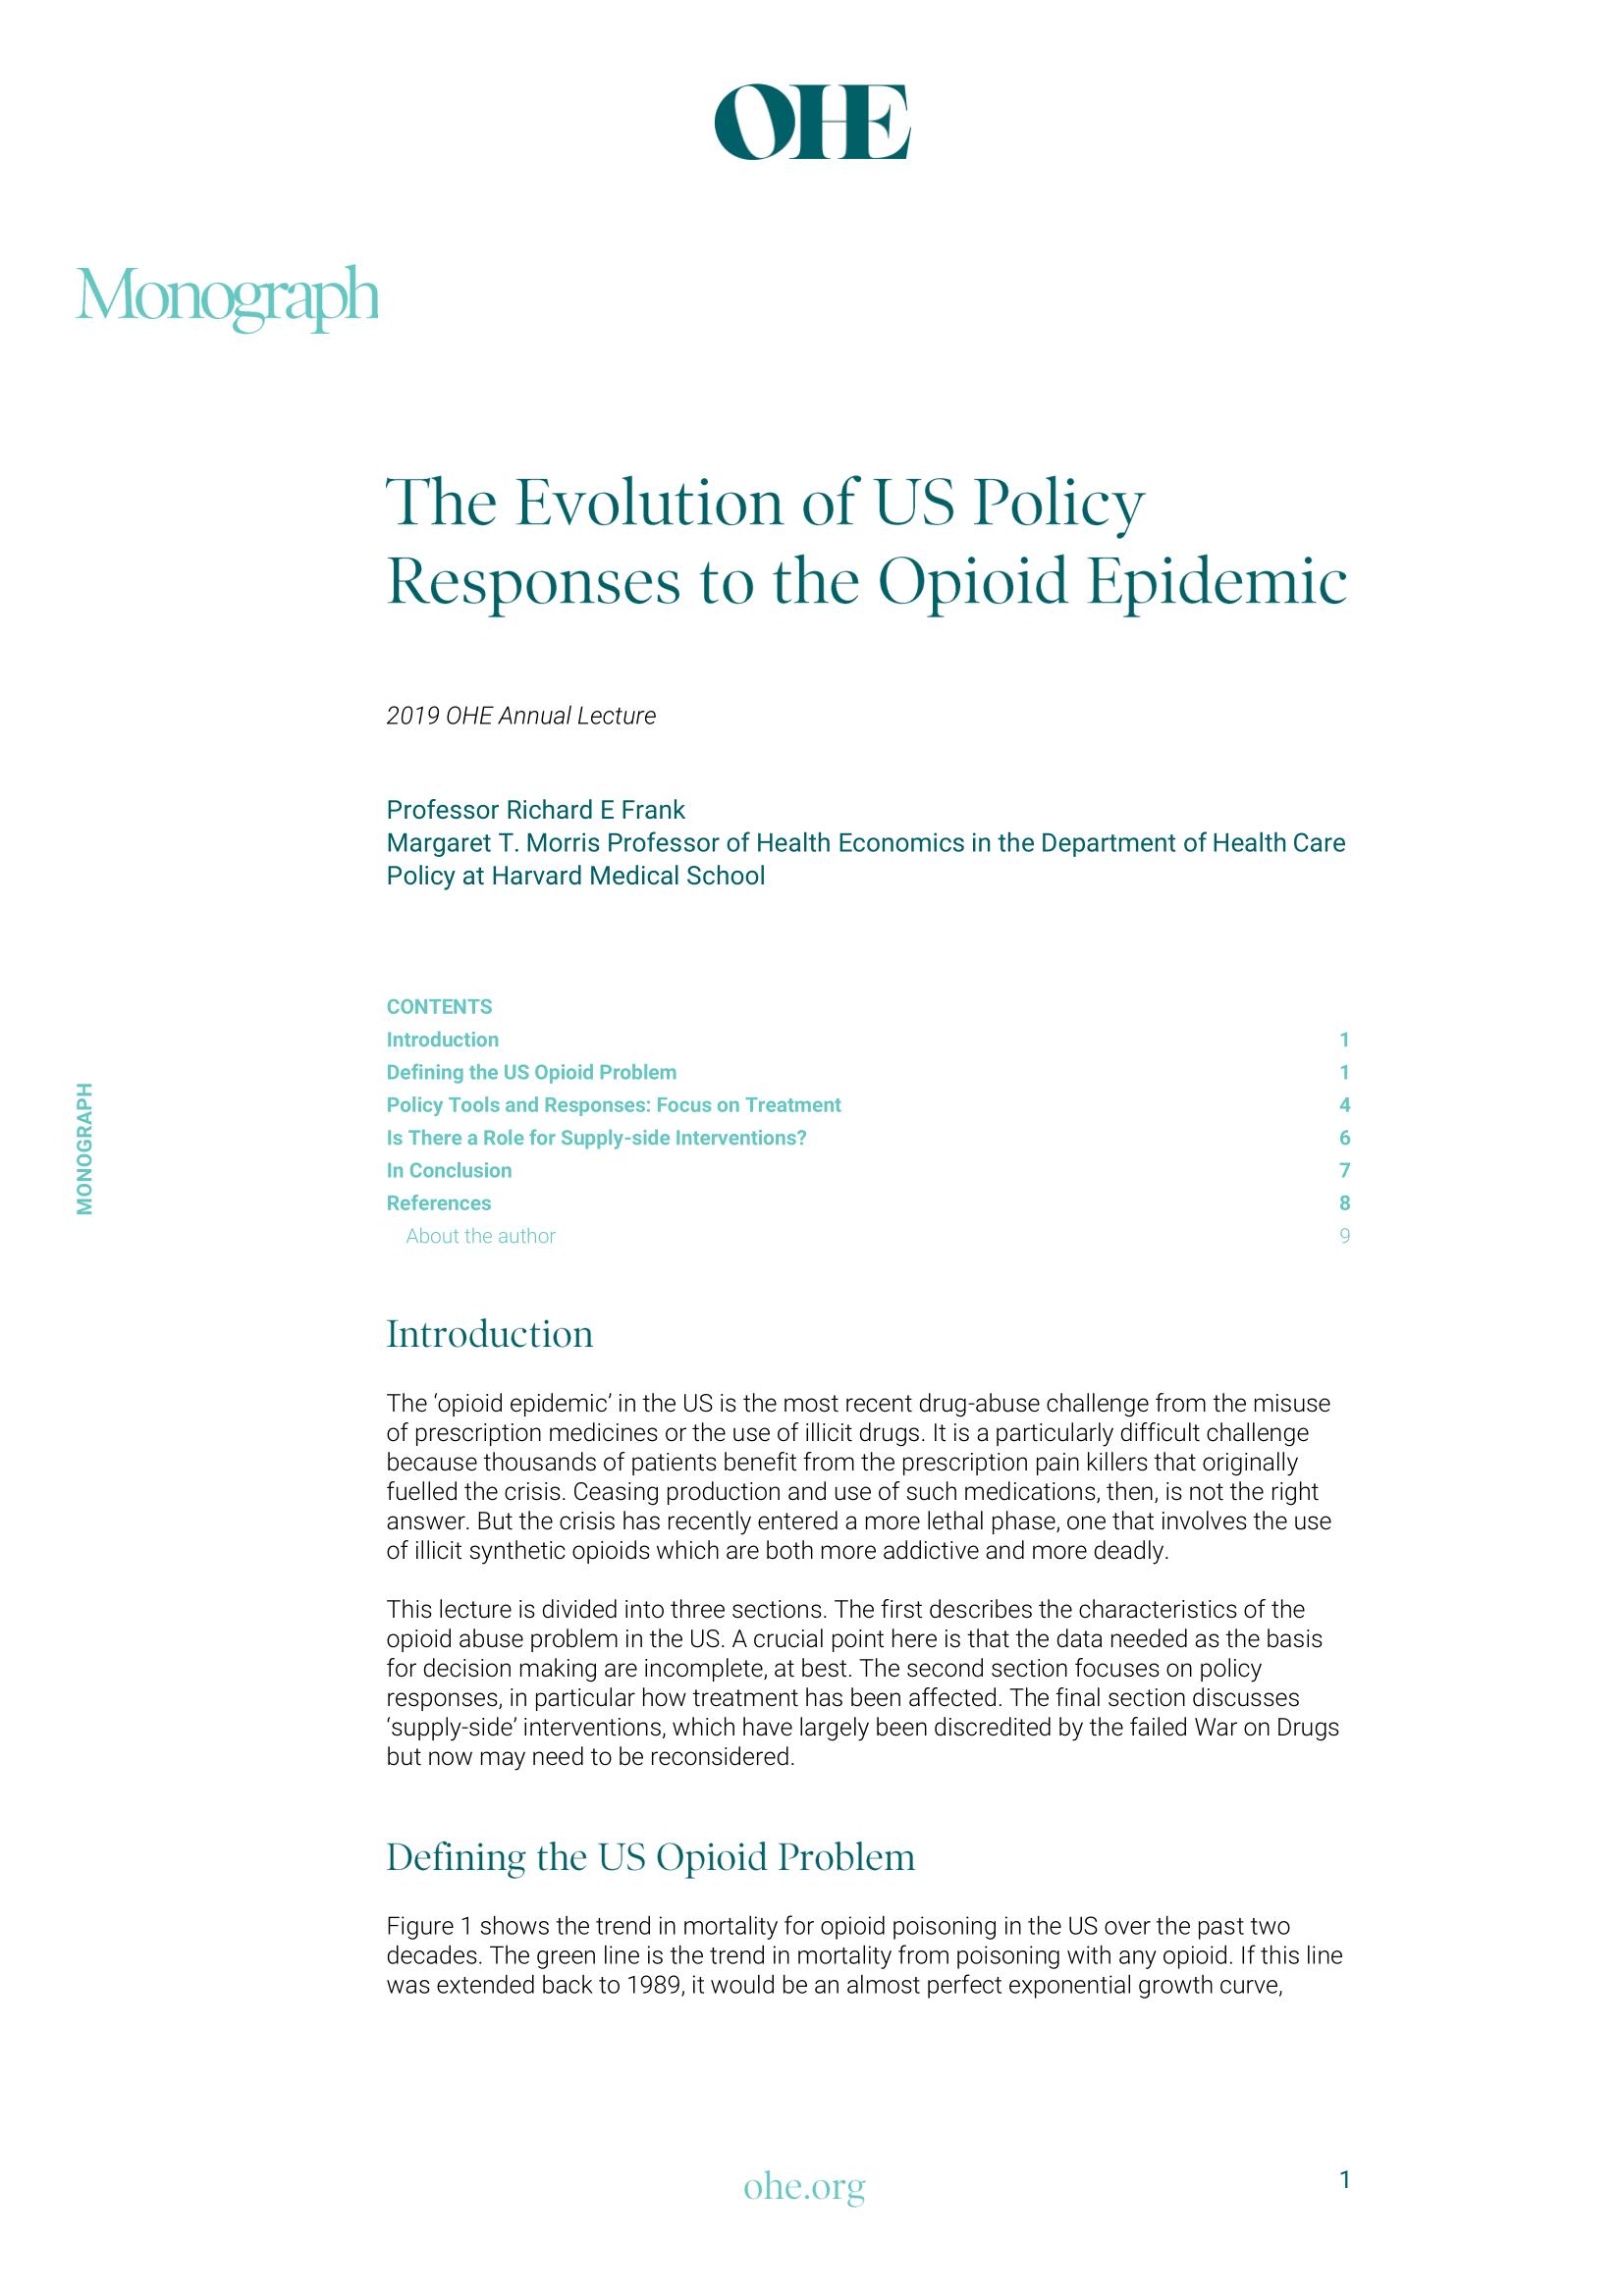 The Evolution of US Policy Responses to the Opioid Epidemic